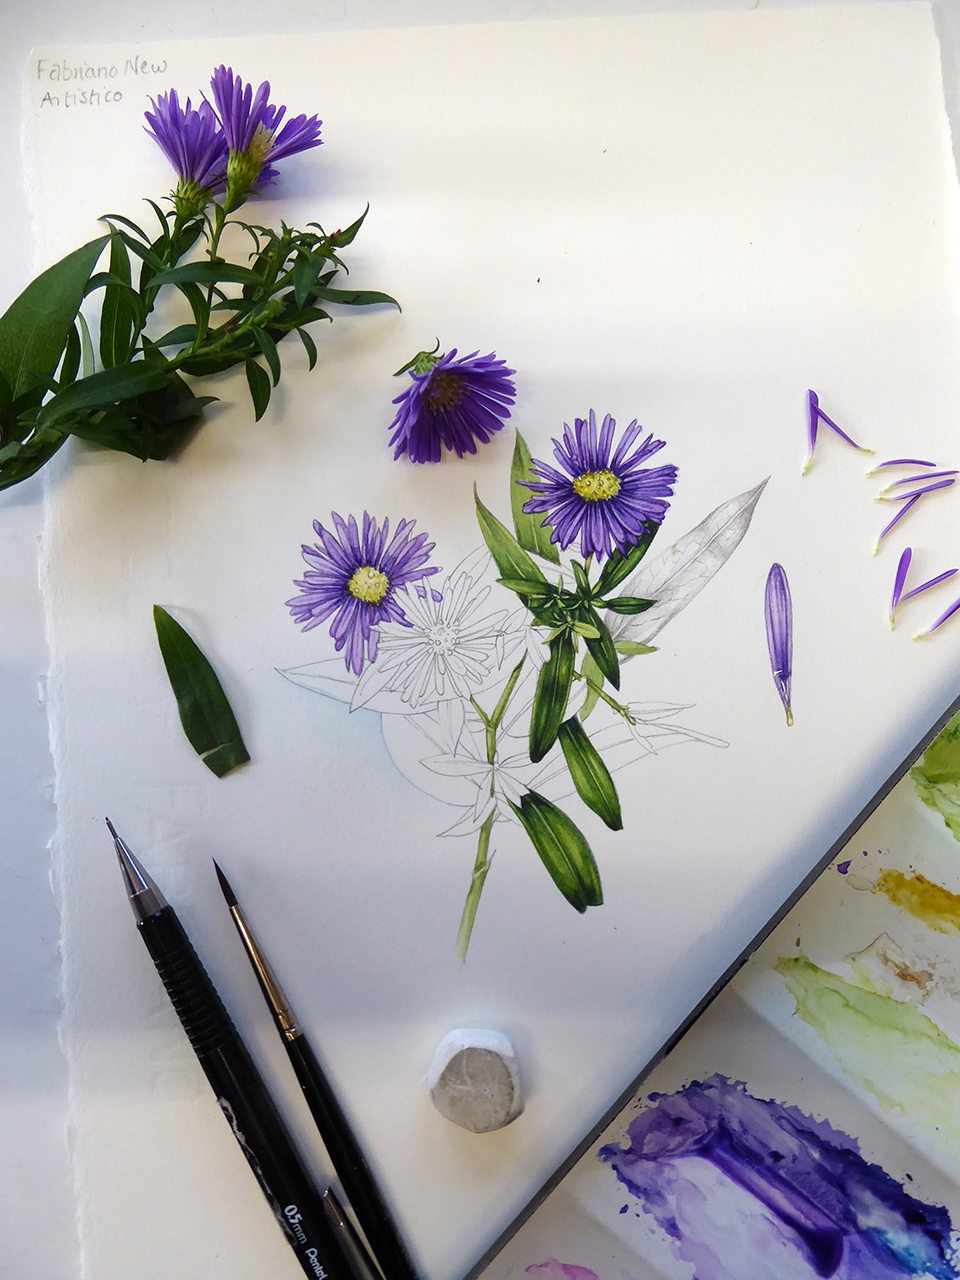 Aster On New Fabriano Artistico Traditional White Hp Watercolour Paper Tested For Botanical Illustration By Lizzie Harper Done Lizzie Harper